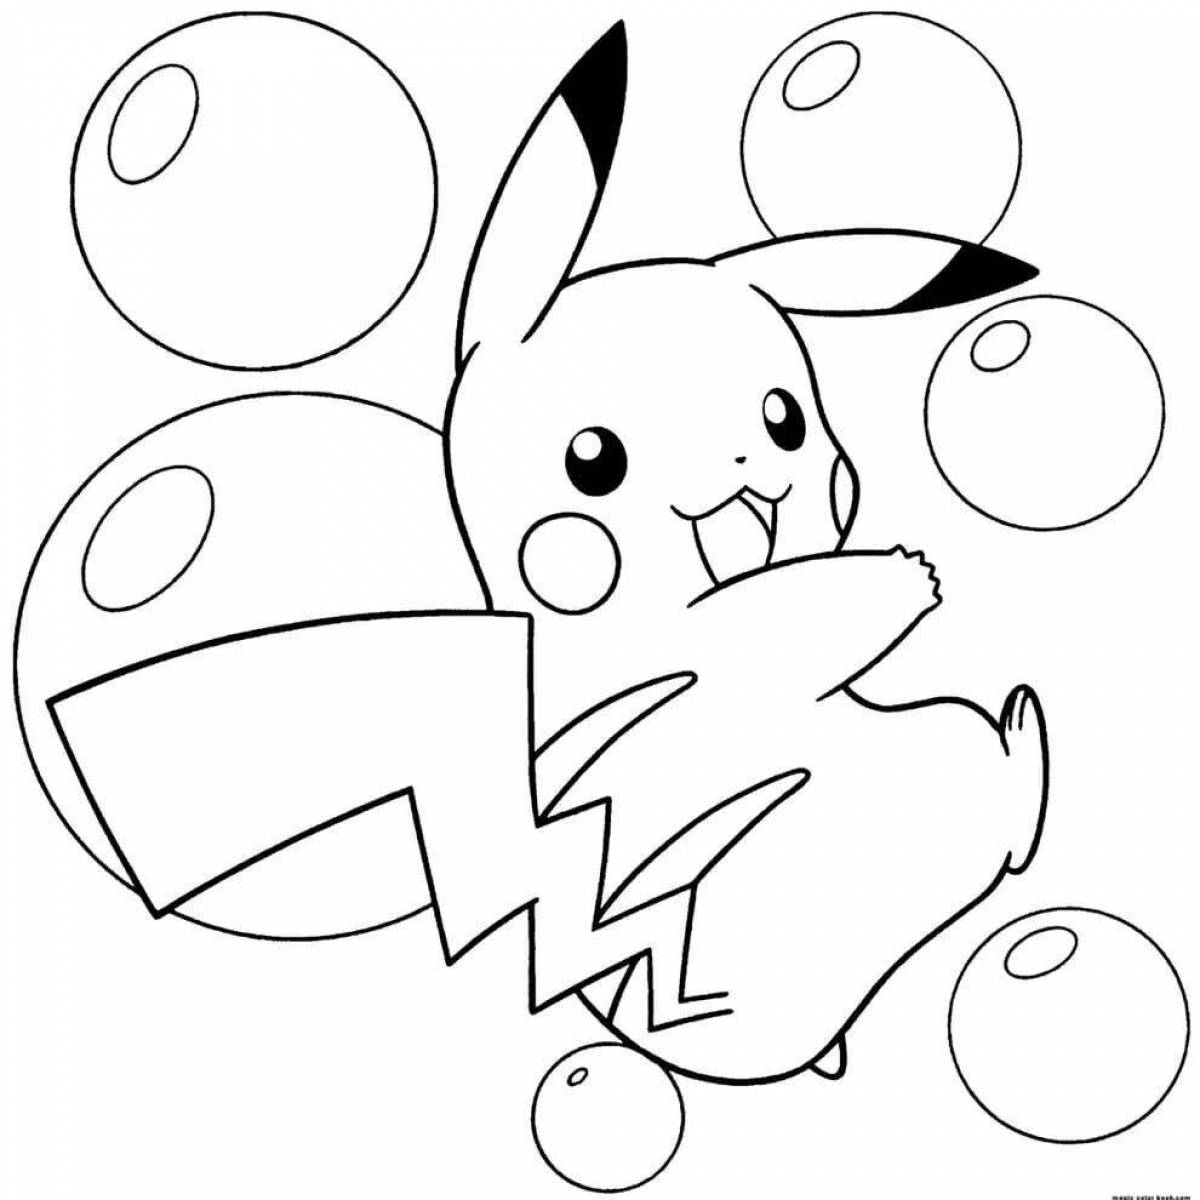 Funny pikachu coloring book for boys